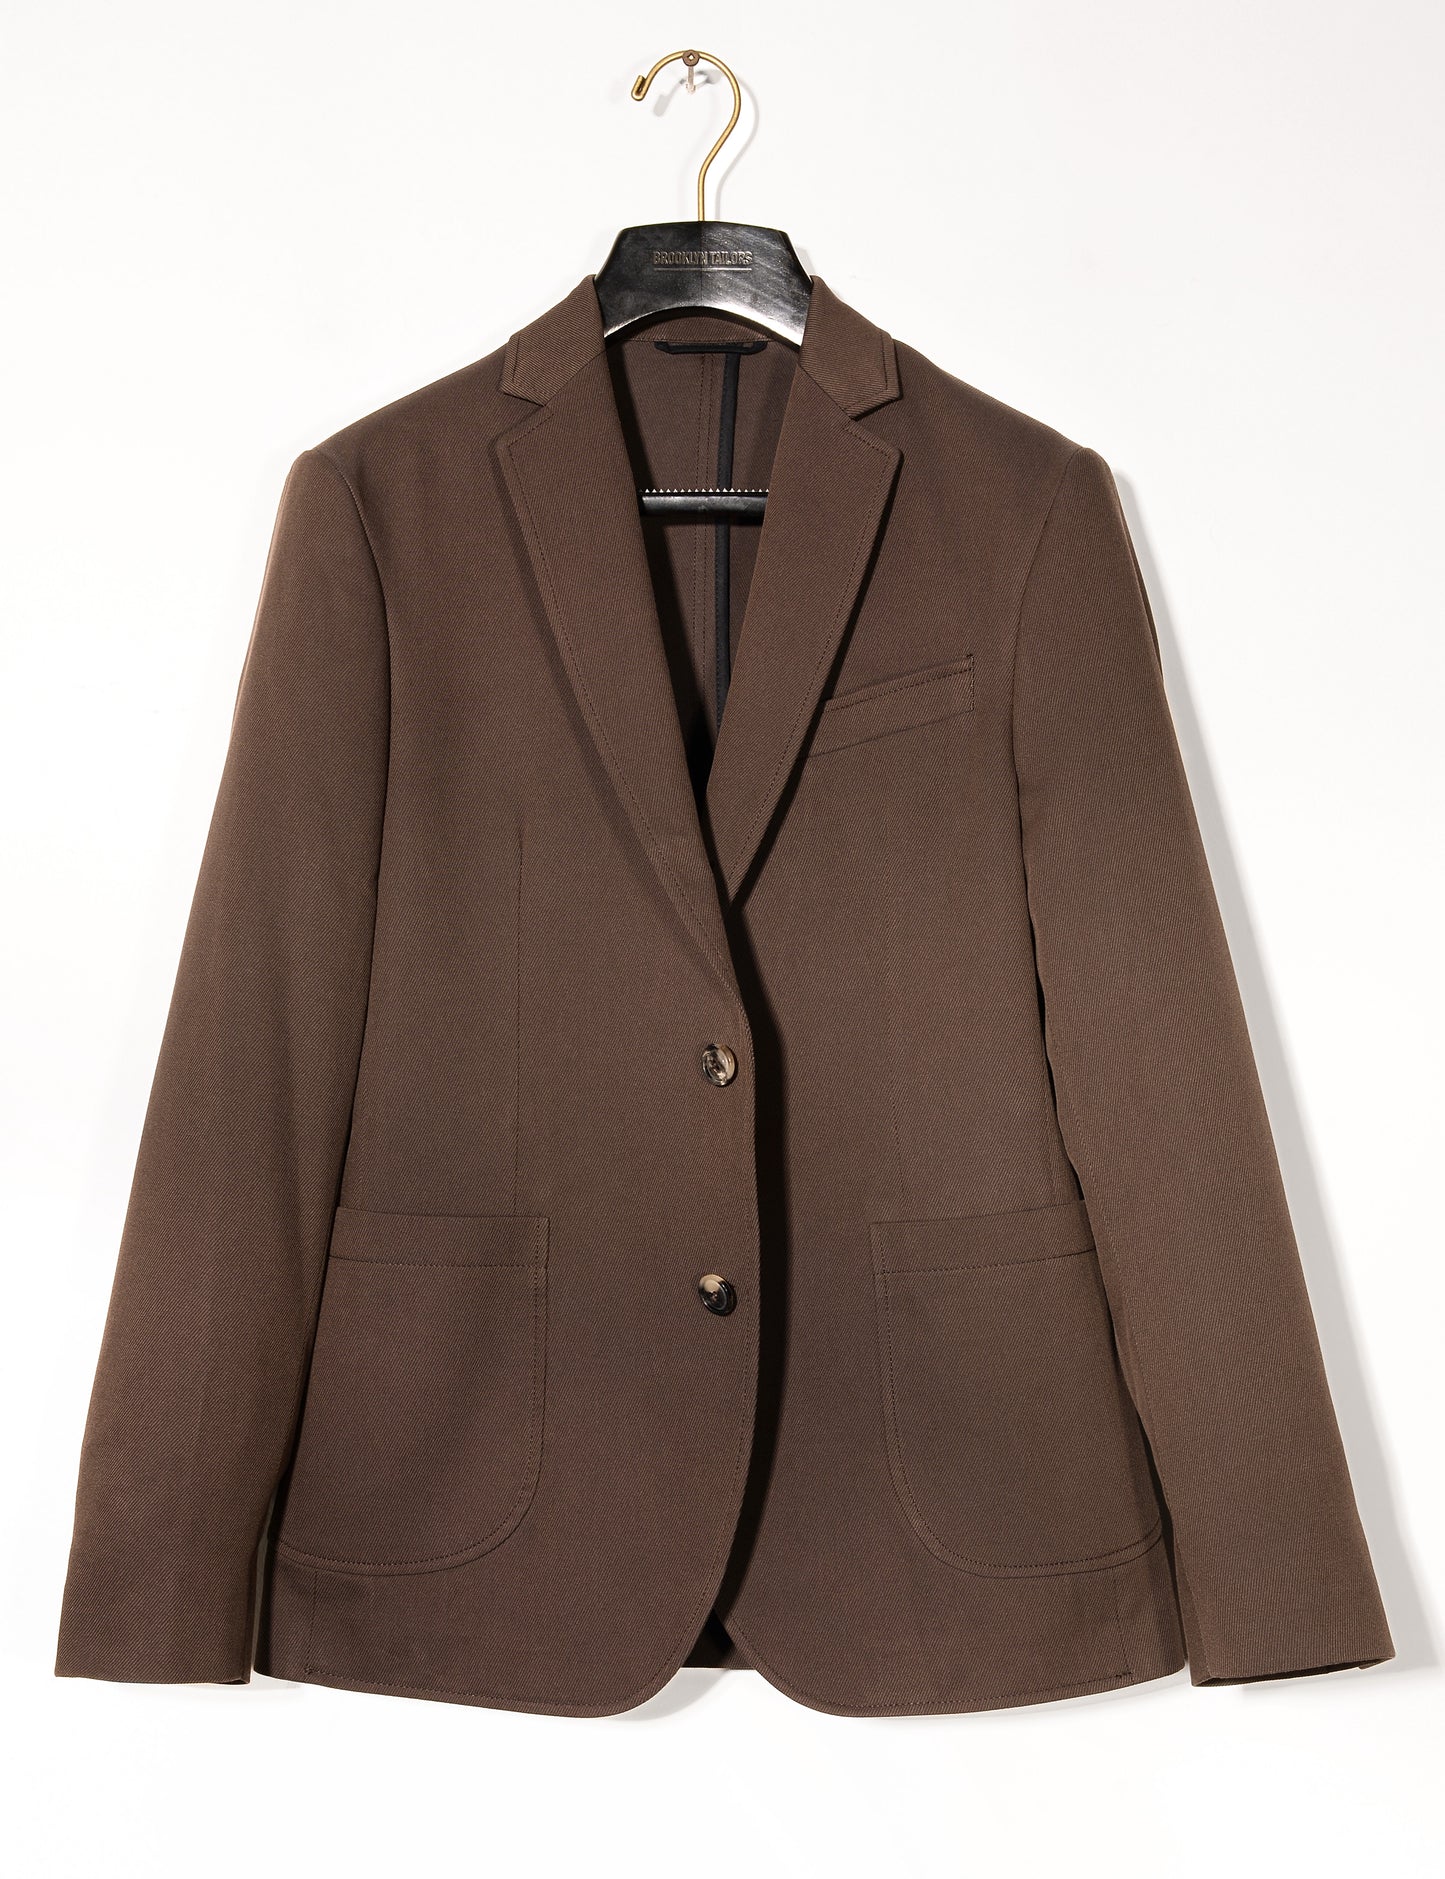 FINAL SALE: BKT35 Unstructured Jacket in Cavalry Twill - Rosewood